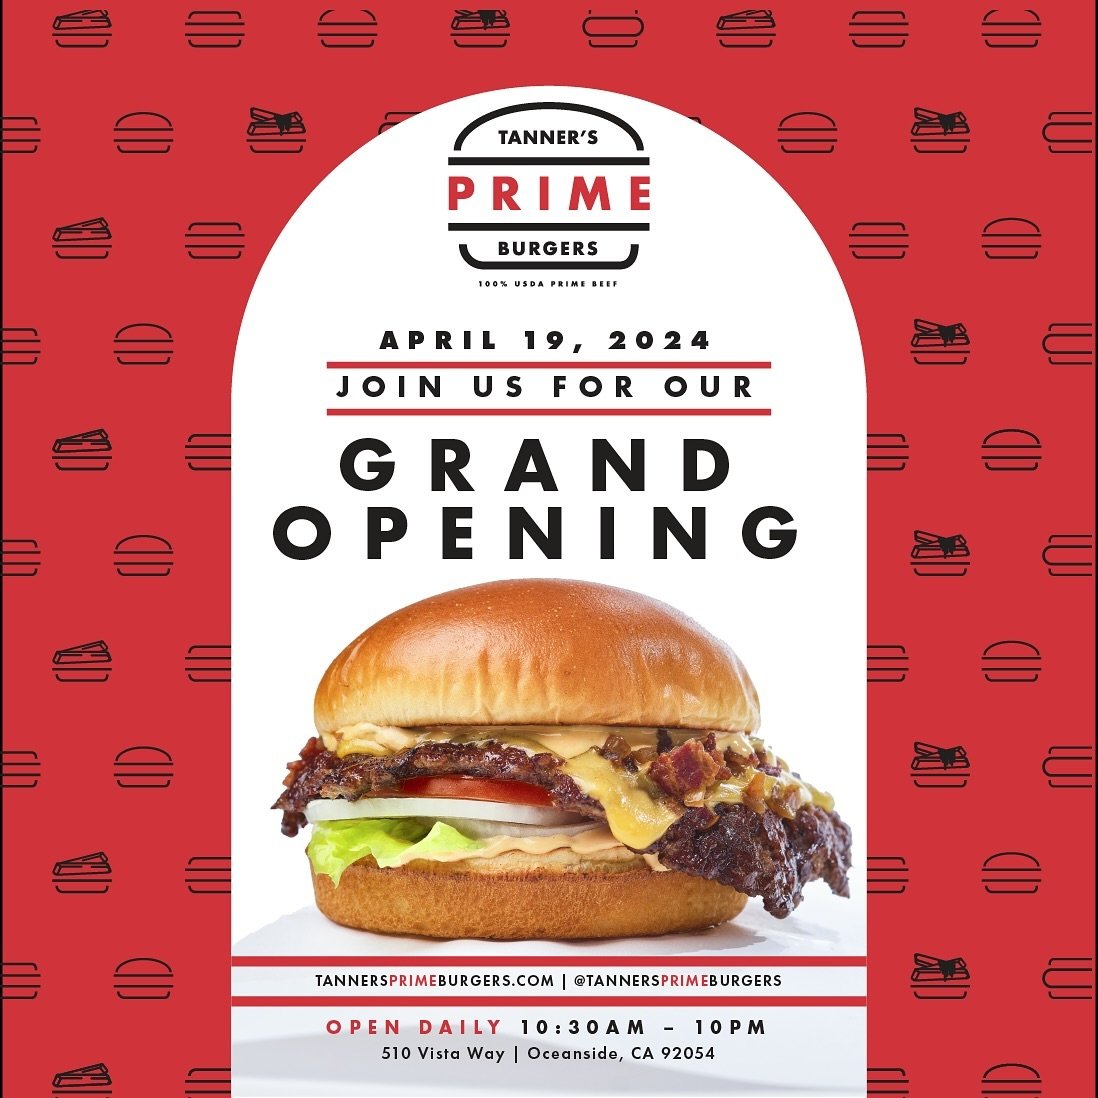 🍔GRAND OPENING ALERT🍔
We&rsquo;re thrilled to announce the grand opening of Tanner&rsquo;s PRIME Burger in Oceanside! 🎉

Mark your calendars for April 19th and get ready to sink your teeth into the juiciest, most mouthwatering PRIME Smash Burgers 